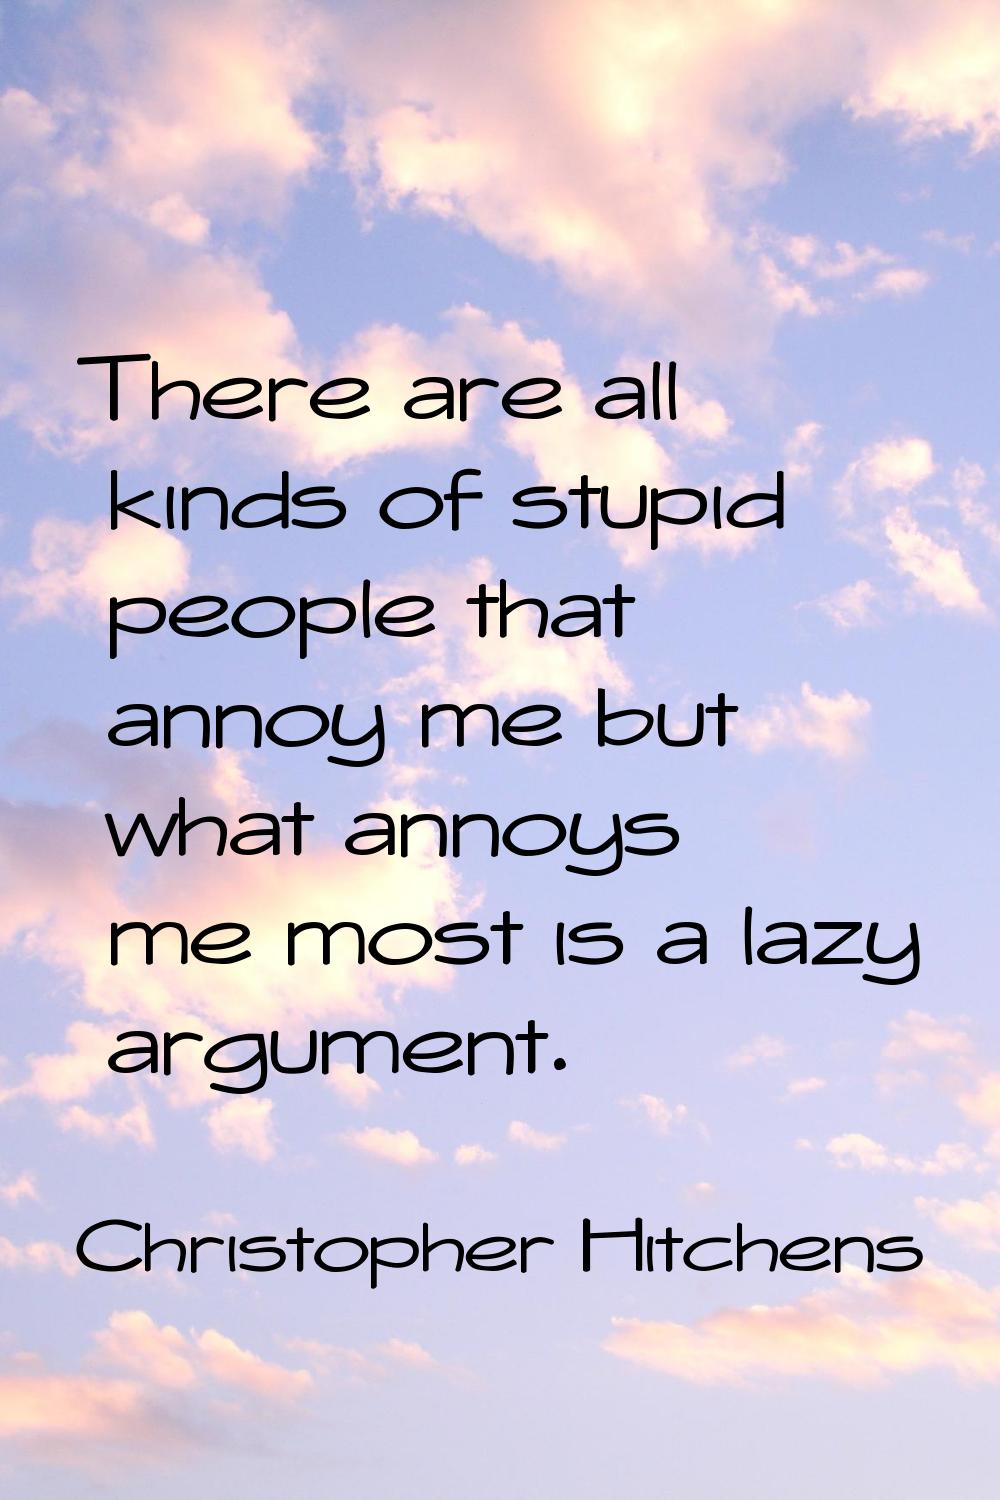 There are all kinds of stupid people that annoy me but what annoys me most is a lazy argument.